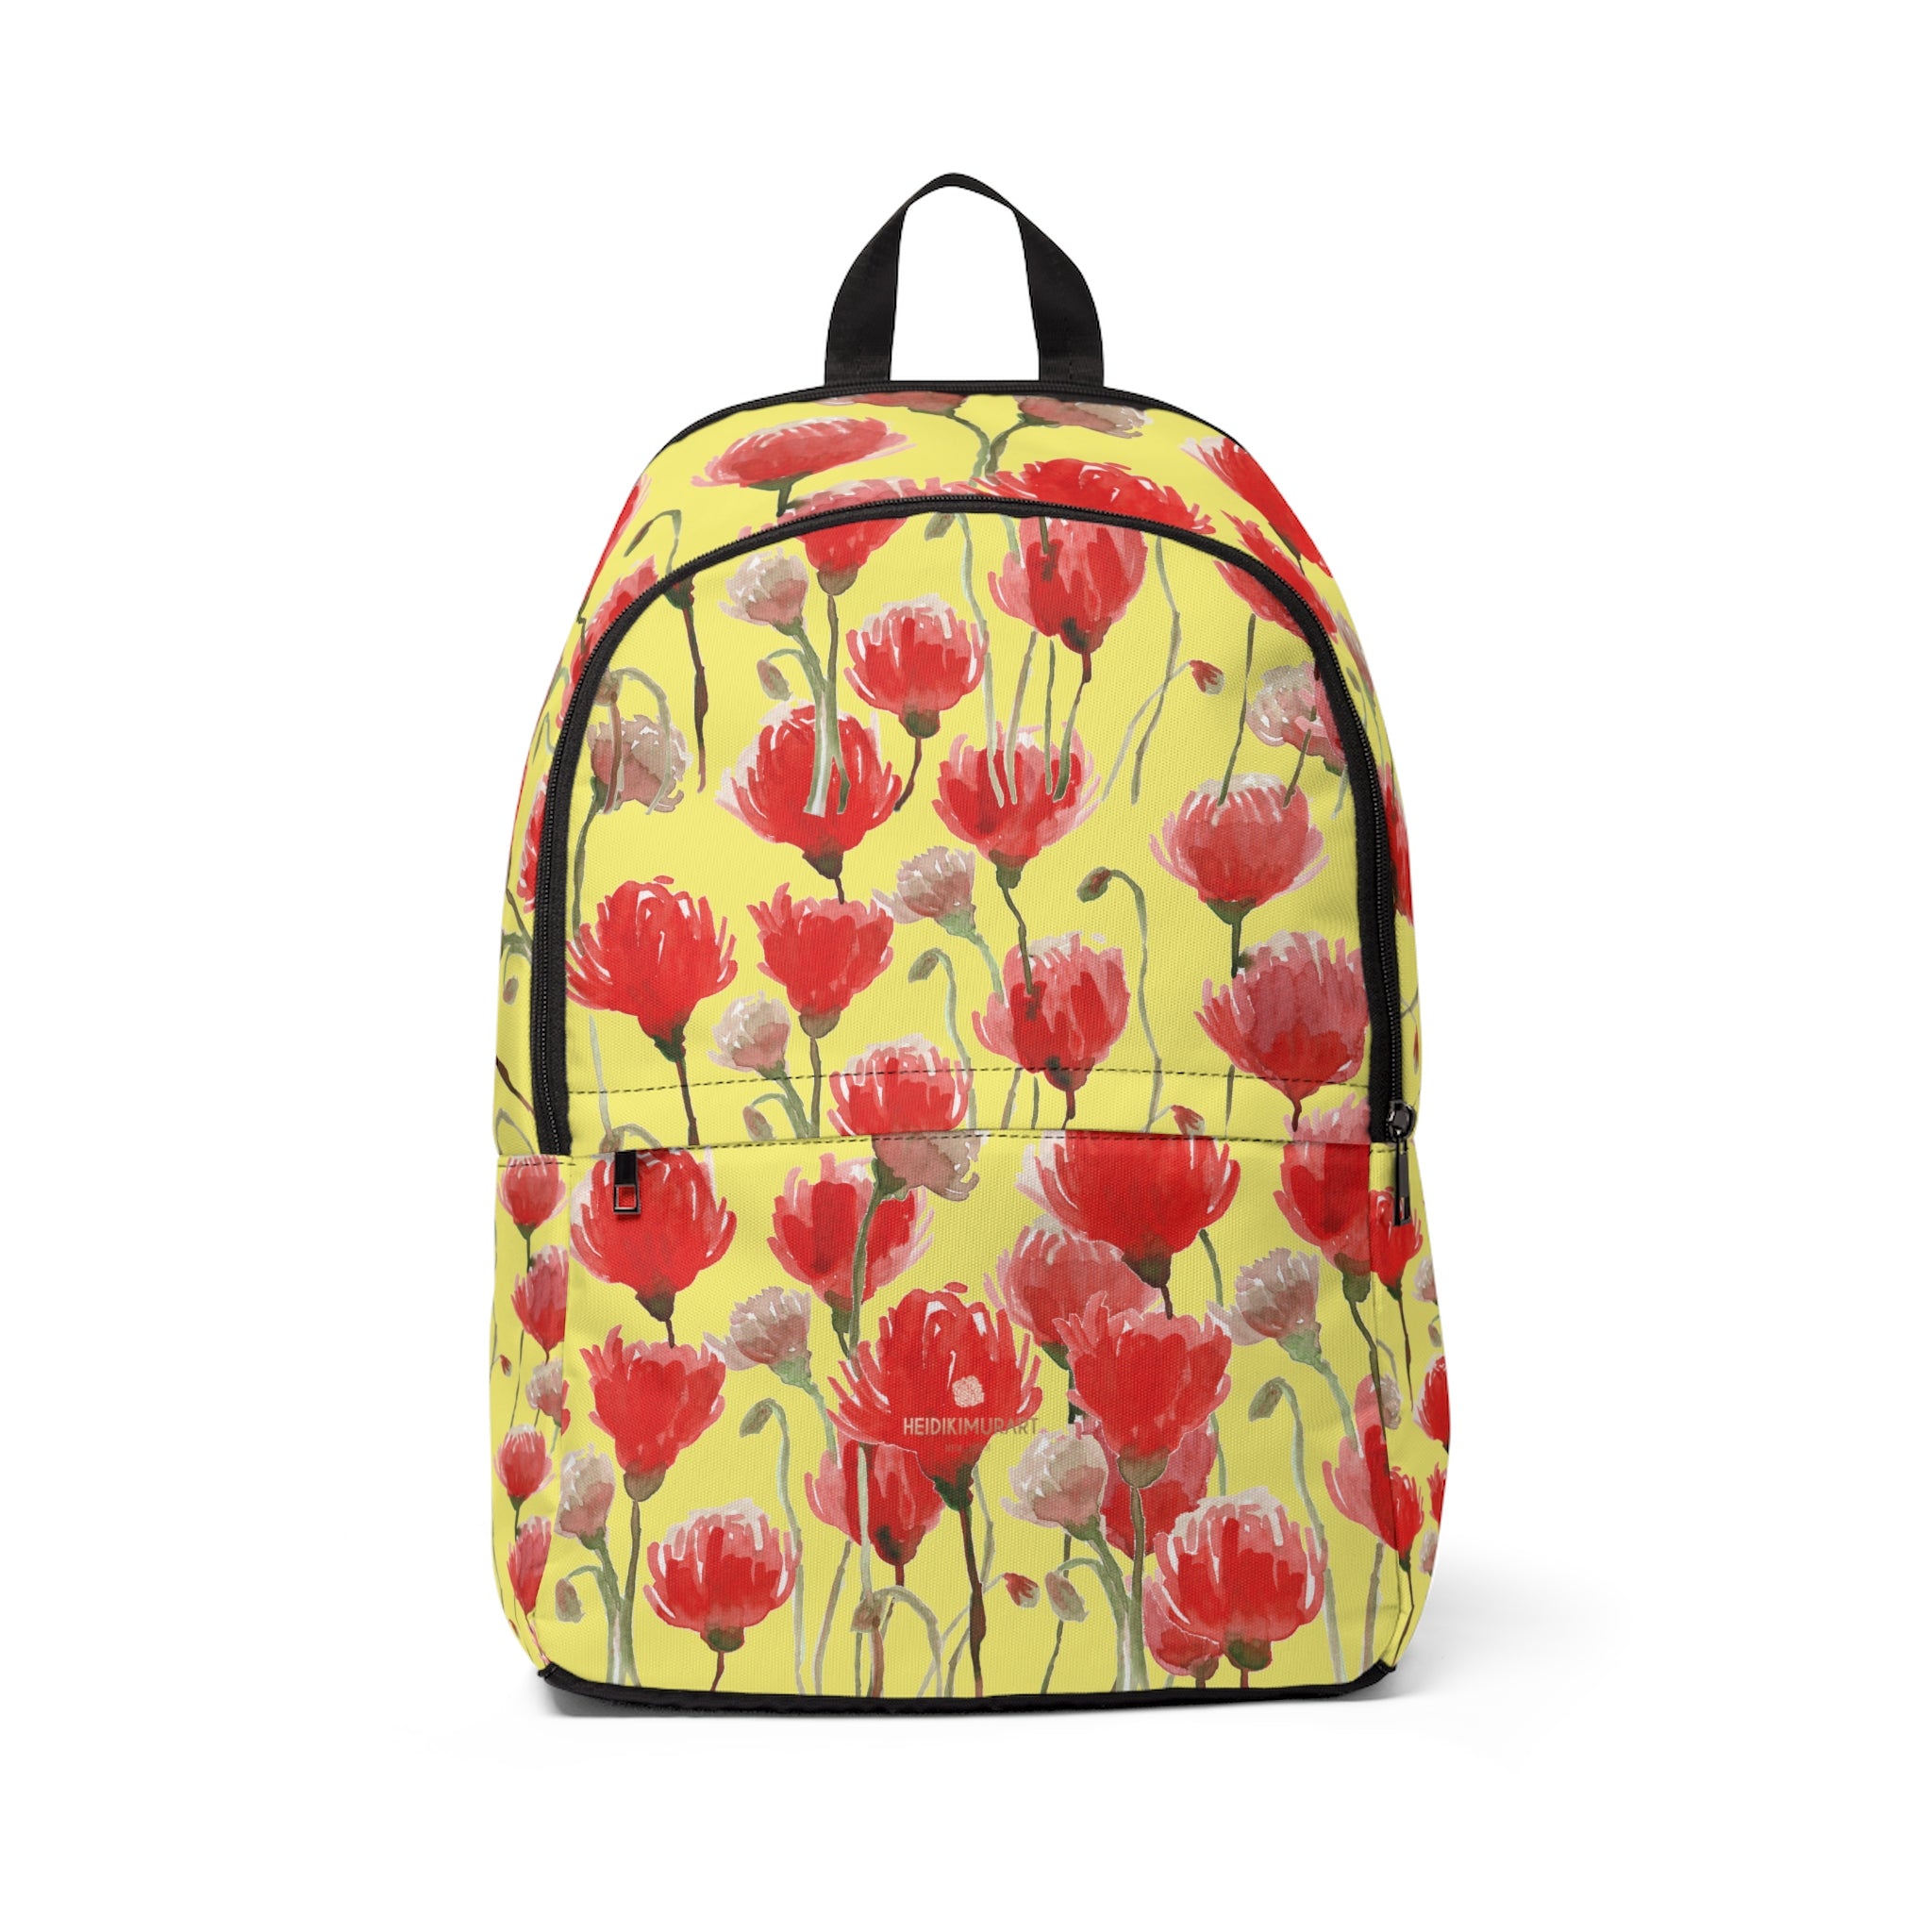 Yellow Red Poppy Flower Floral Print Designer Unisex Fabric Backpack School Bag With Laptop Slot-Backpack-One Size-Heidi Kimura Art LLC Yellow Red Poppy Backpack, Lightweight Waterproof Best Soft Nylon Flower Floral Print Designer Unisex Fabric Backpack School Bag With Laptop Slot